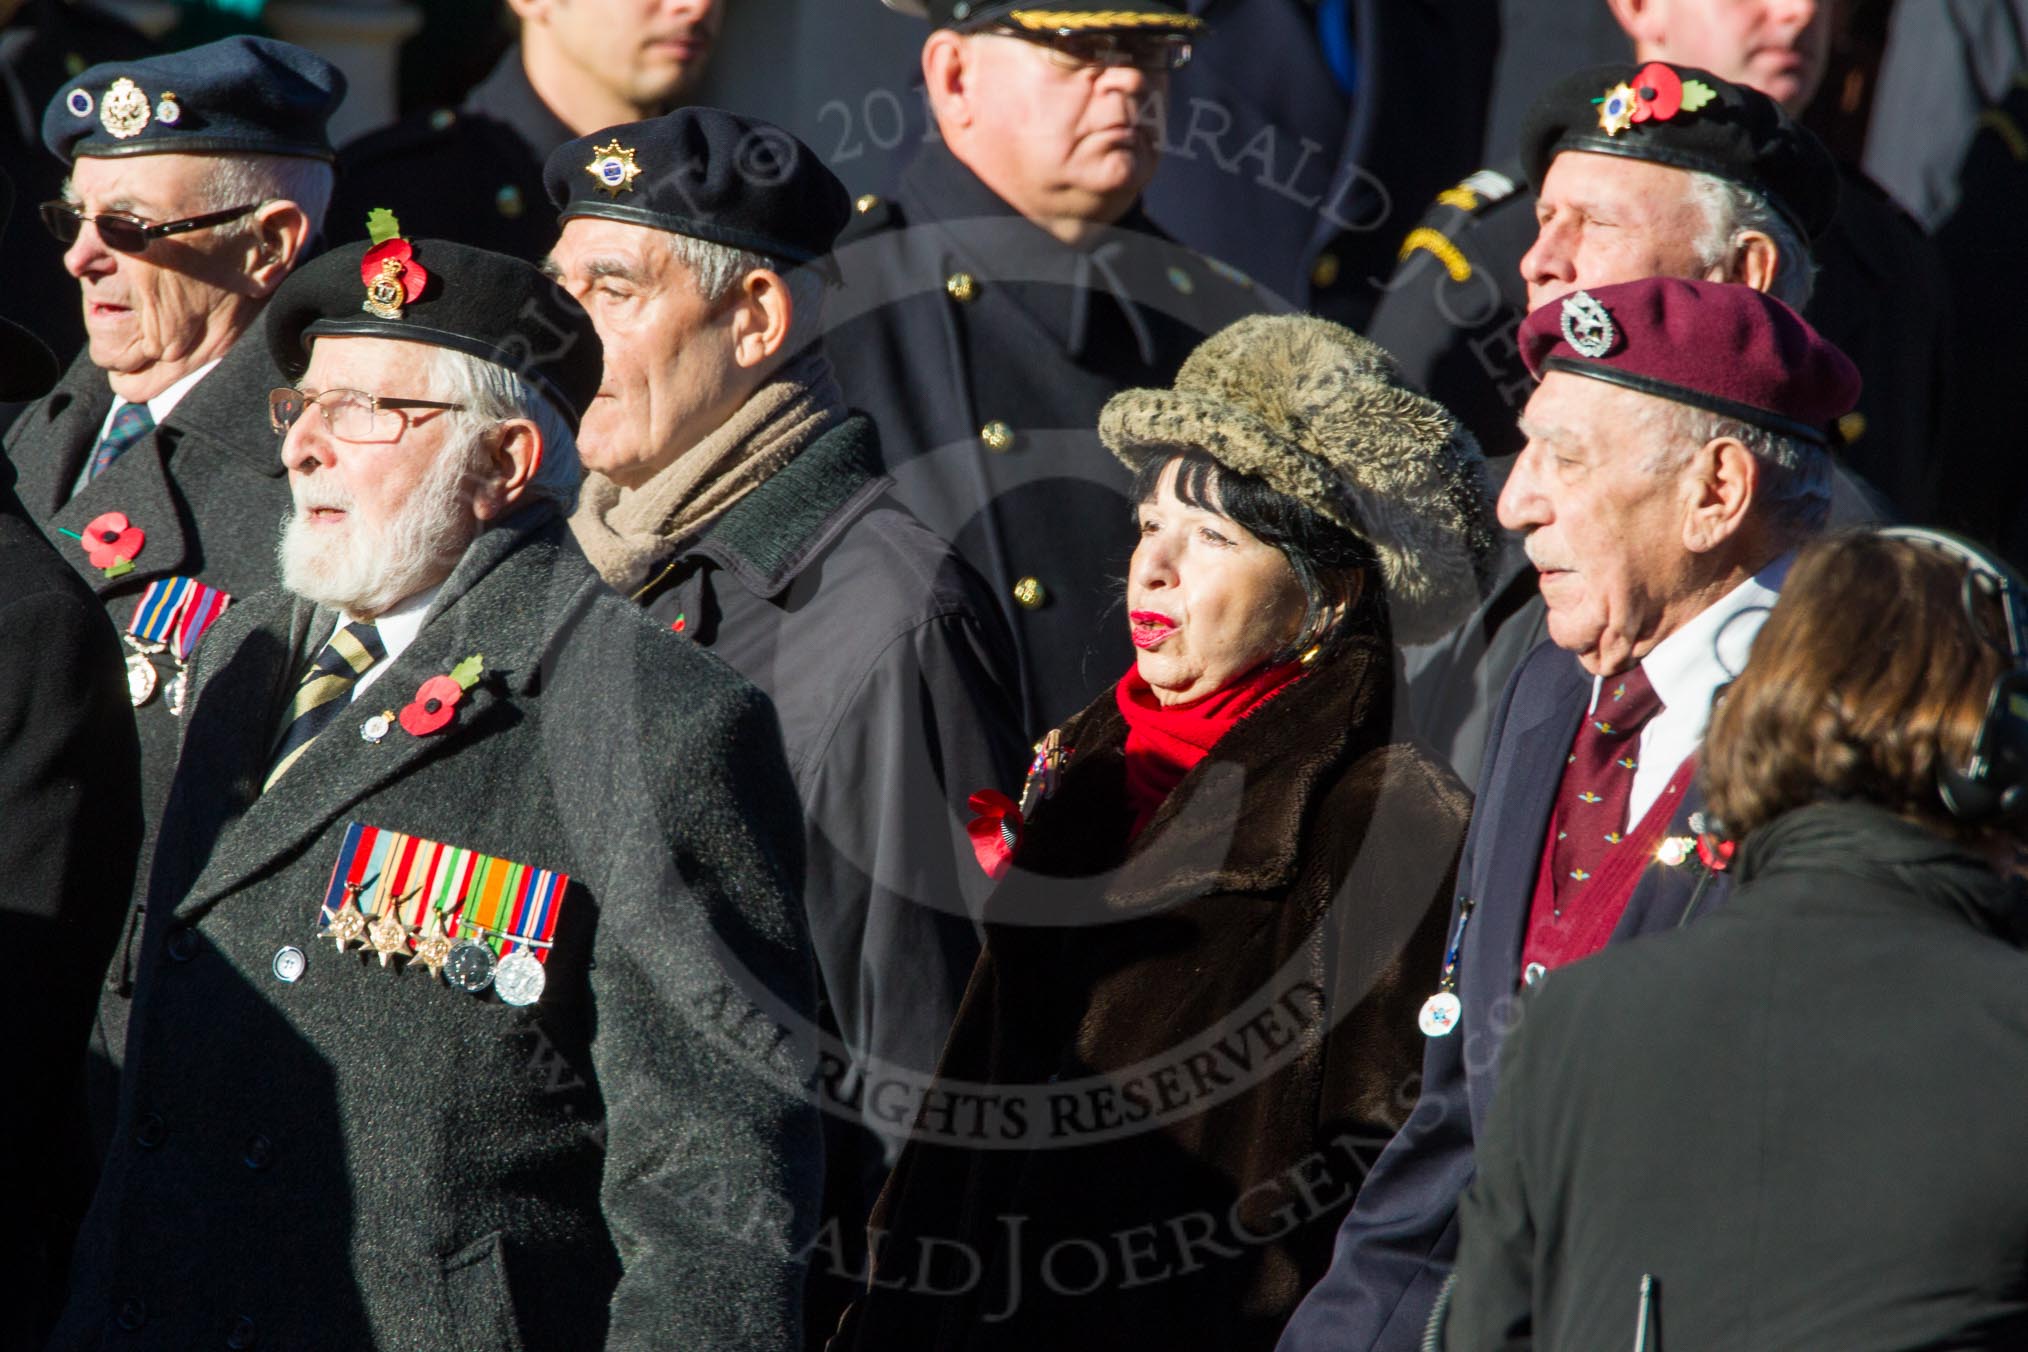 Remembrance Sunday Cenotaph March Past 2013: D26 - Association of Jewish Ex-Servicemen & Women..
Press stand opposite the Foreign Office building, Whitehall, London SW1,
London,
Greater London,
United Kingdom,
on 10 November 2013 at 11:41, image #210